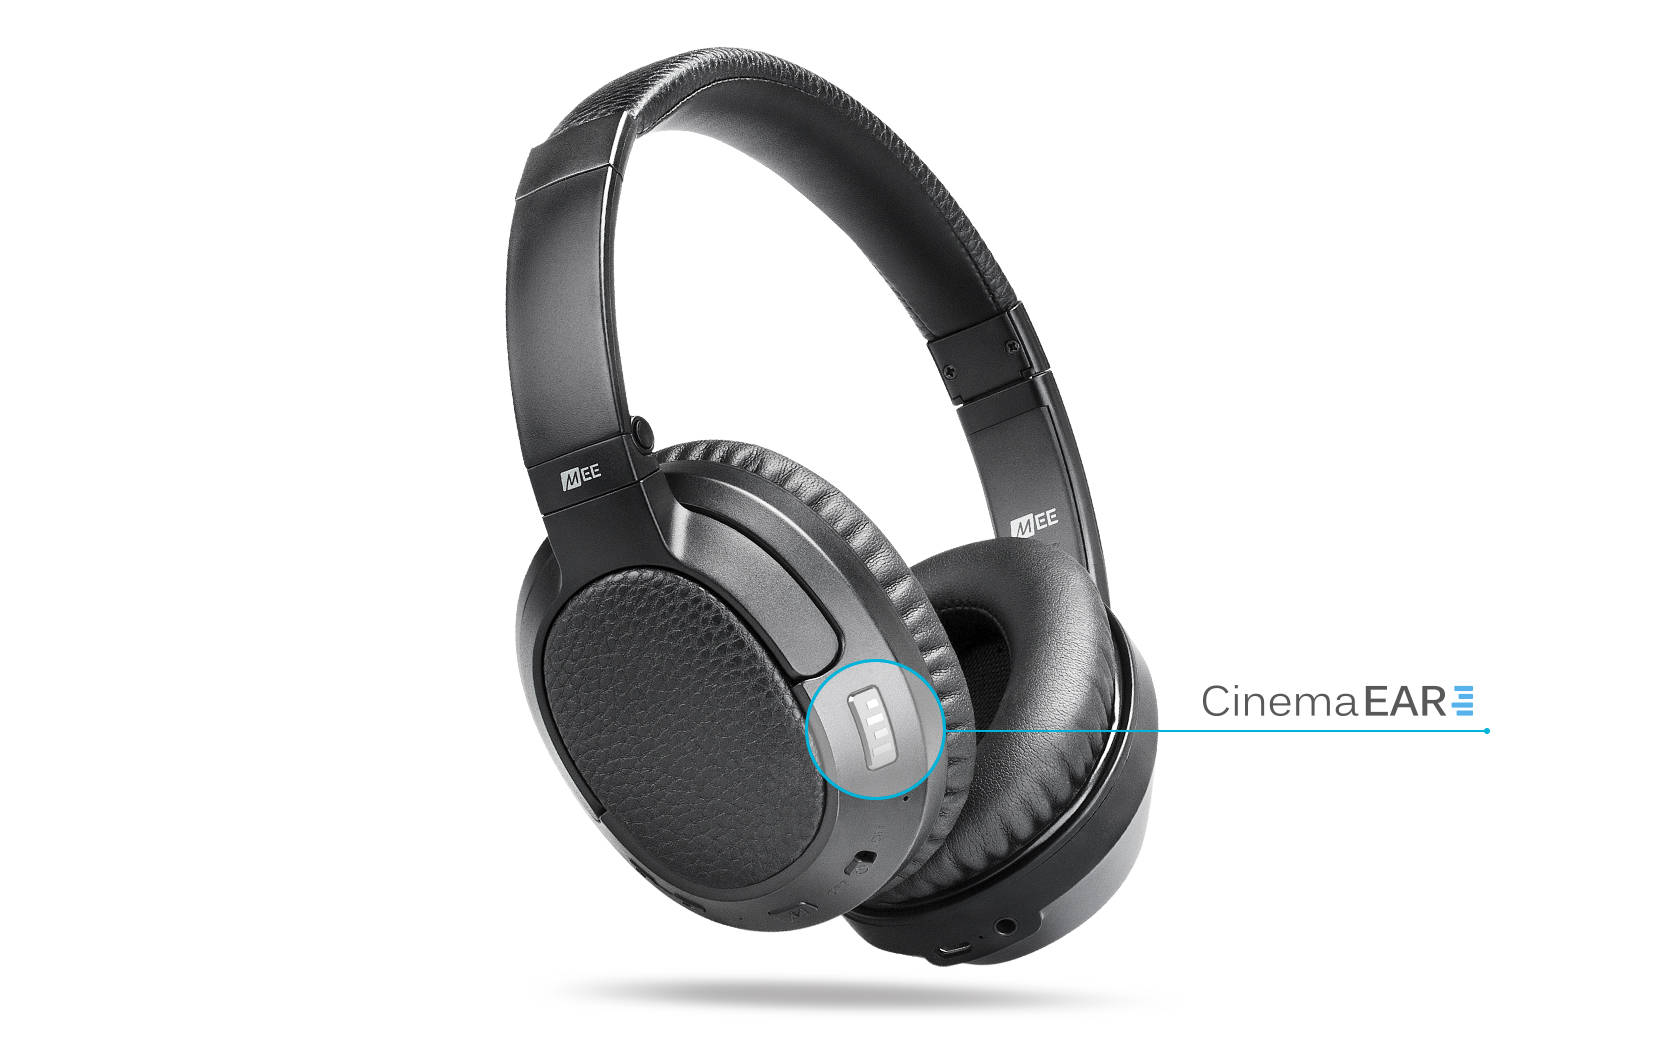 7 x 6 x 1.5 inches Model:HP-AF68-LL 18 x 15 x 4 cm MEE audio Matrix3 Low Latency Bluetooth Wireless HD Headphones with aptX Low Latency for Improved Lip-sync/Reduced Audio delay Renewed 